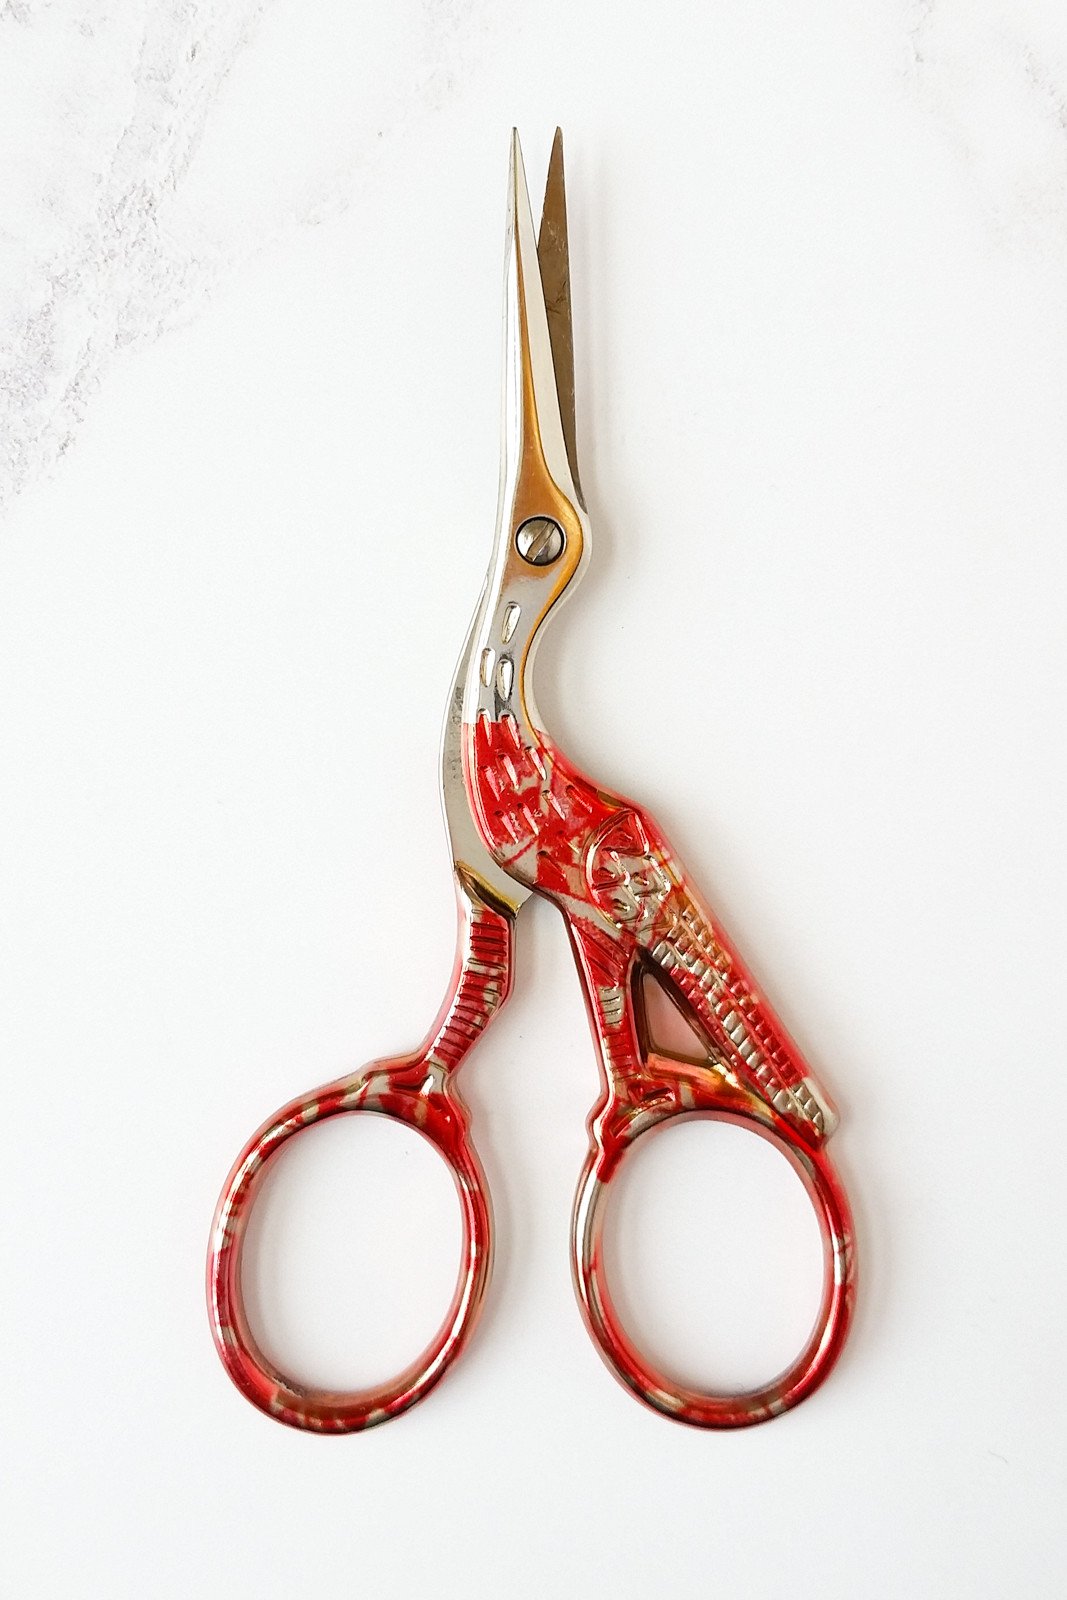 Stork Embroidery Scissors - Snip It Real Good Poster for Sale by  FerntasticArt